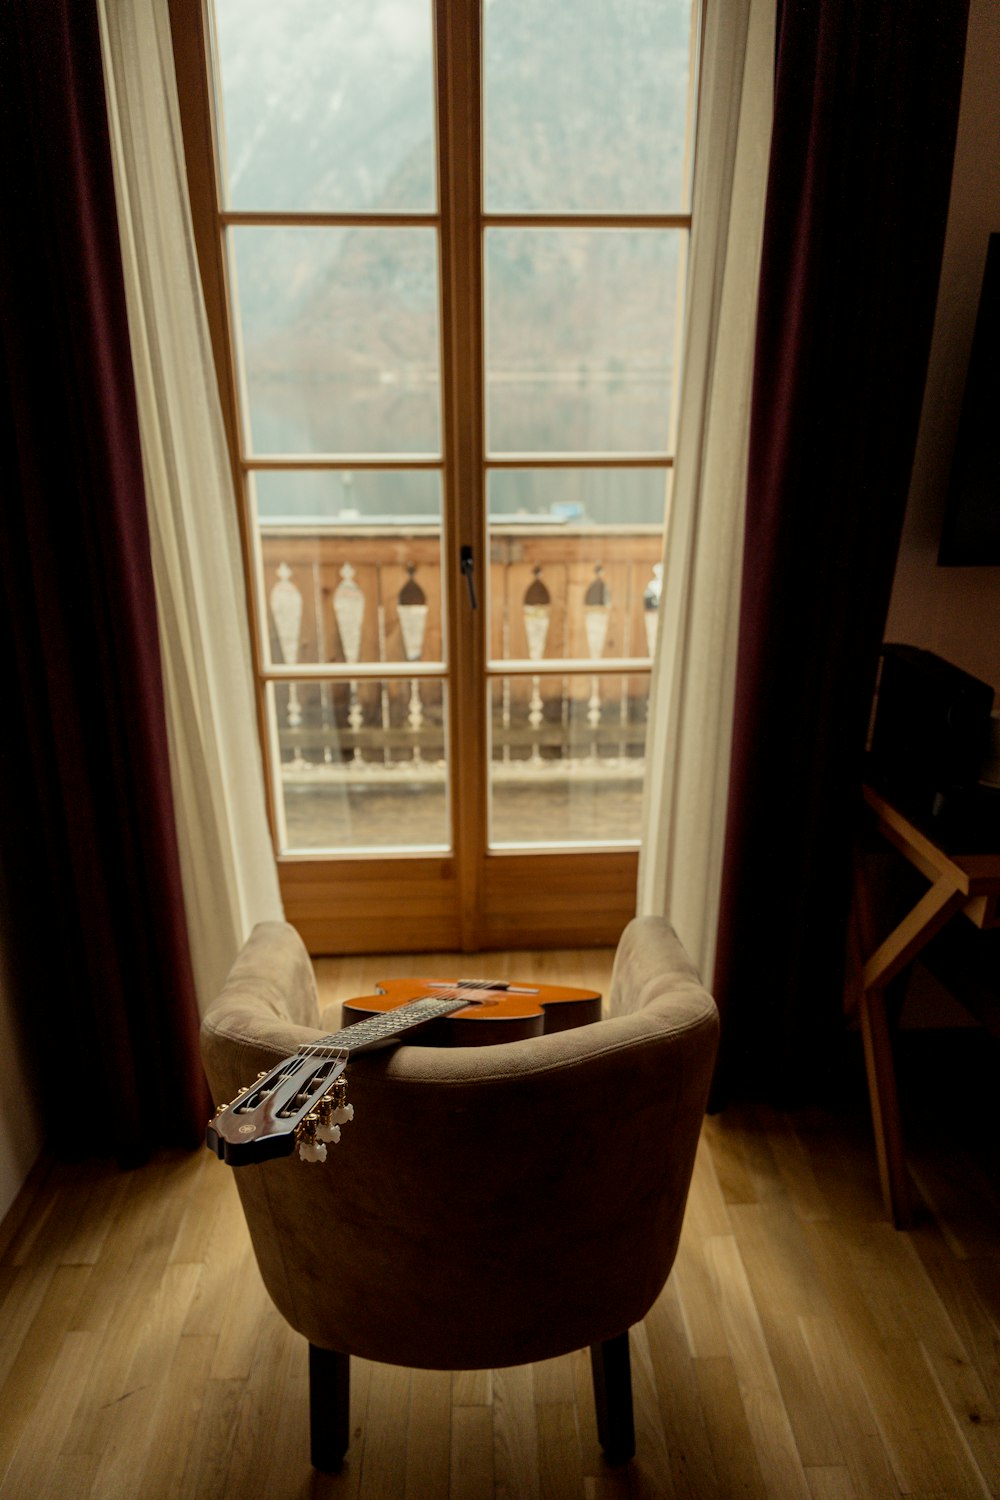 a guitar sitting on a chair in front of a window